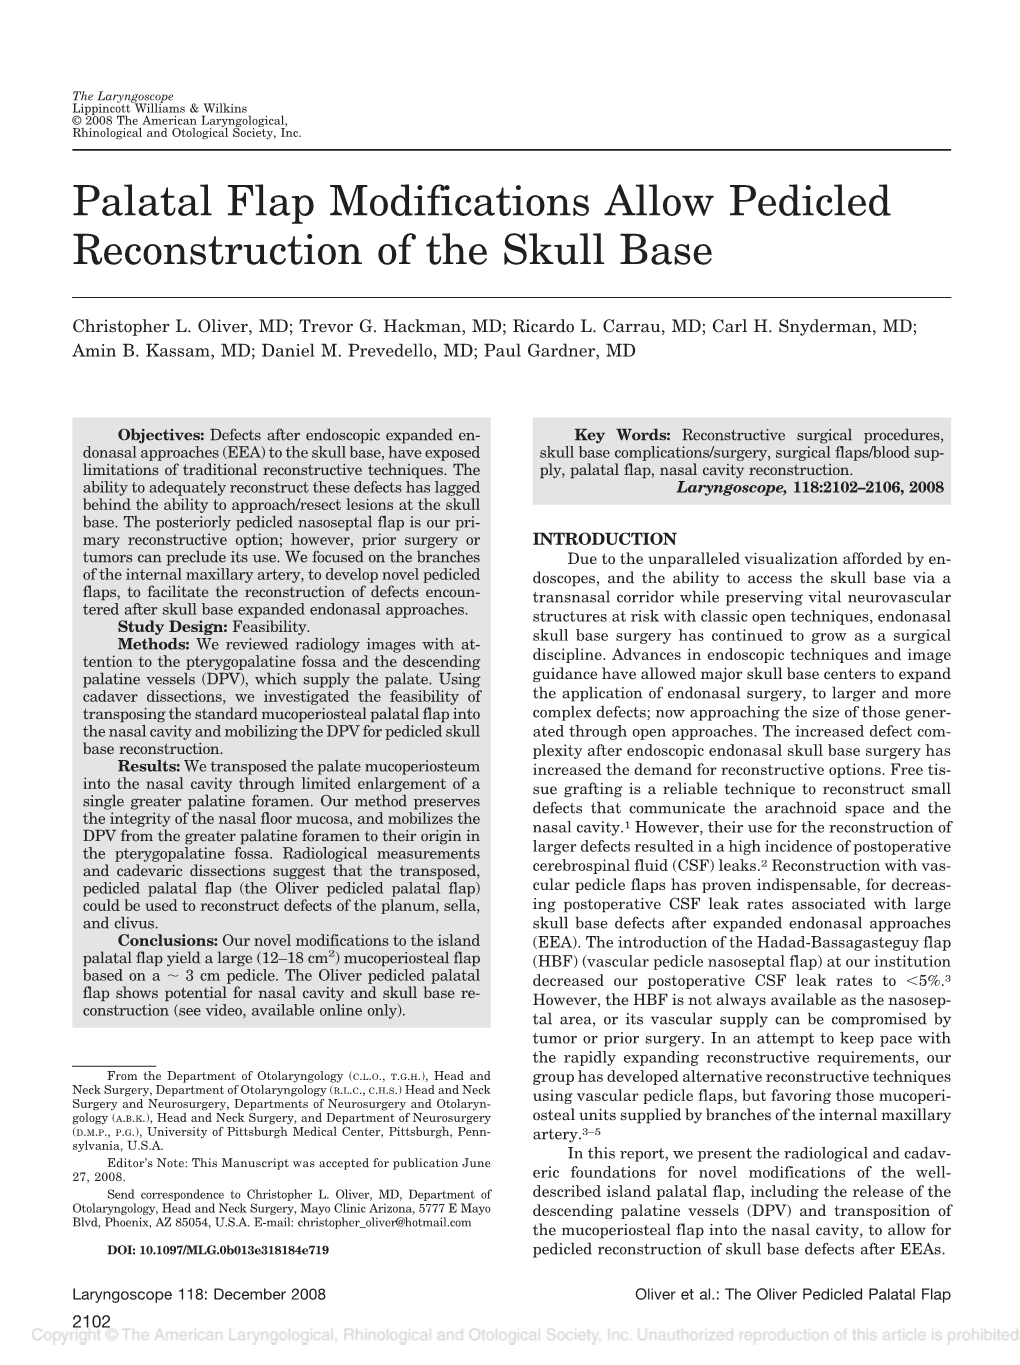 Palatal Flap Modifications Allow Pedicled Reconstruction of the Skull Base